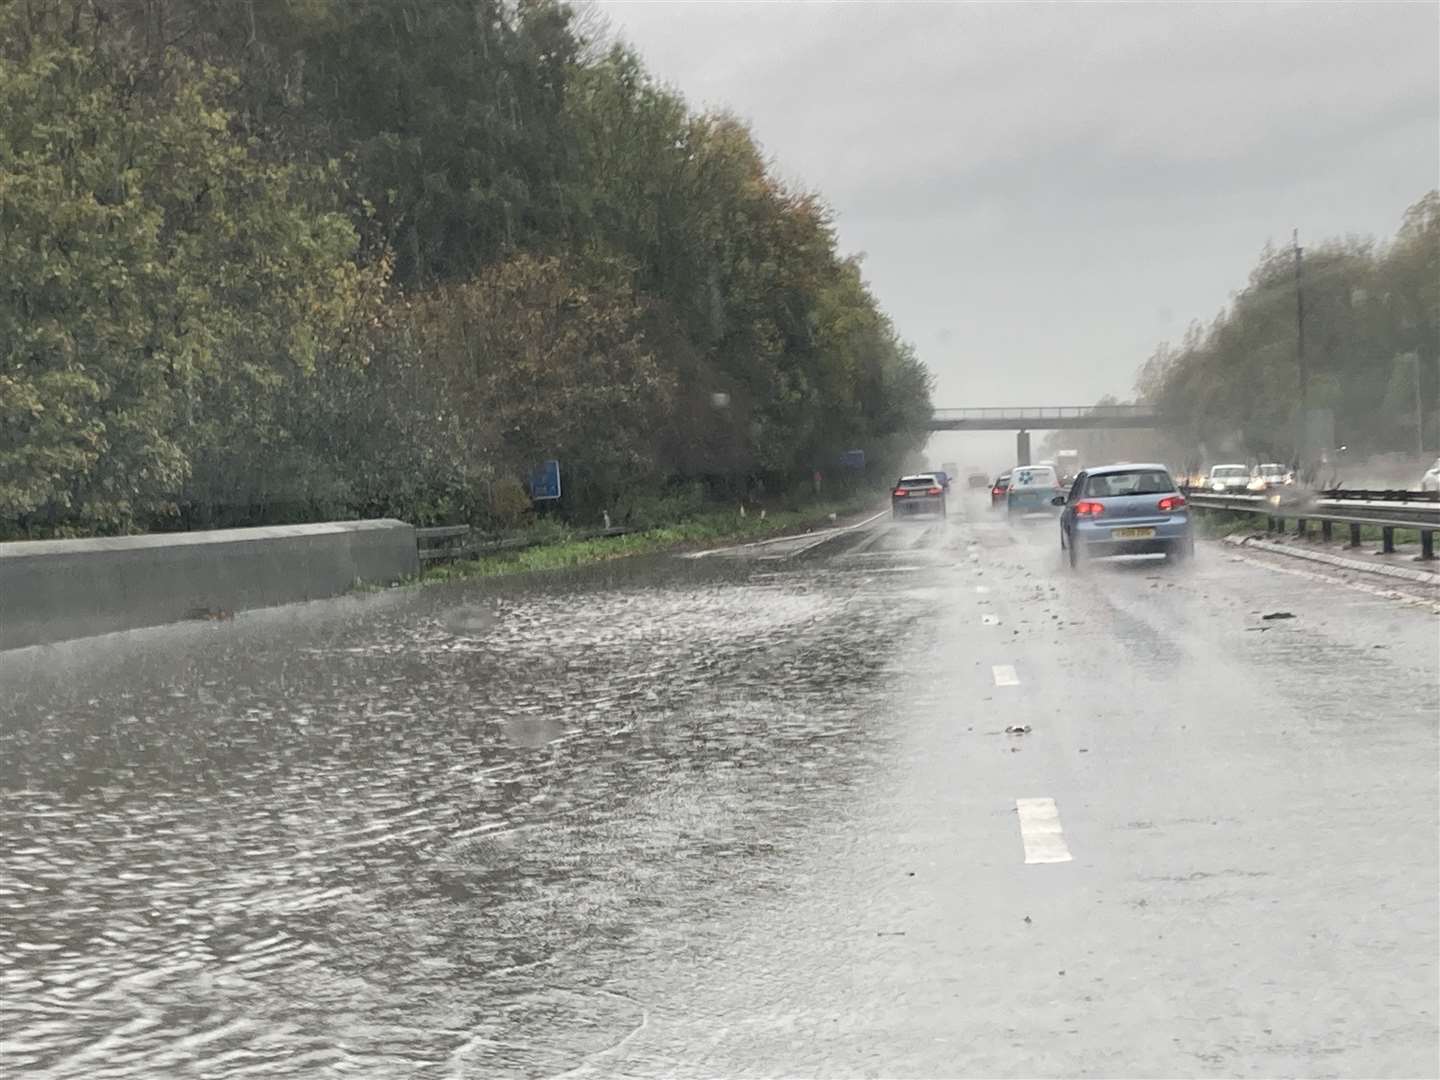 Flooding on the inside lane of the London-bound M2 between Junction 5 and 4. Picture: John Nurden